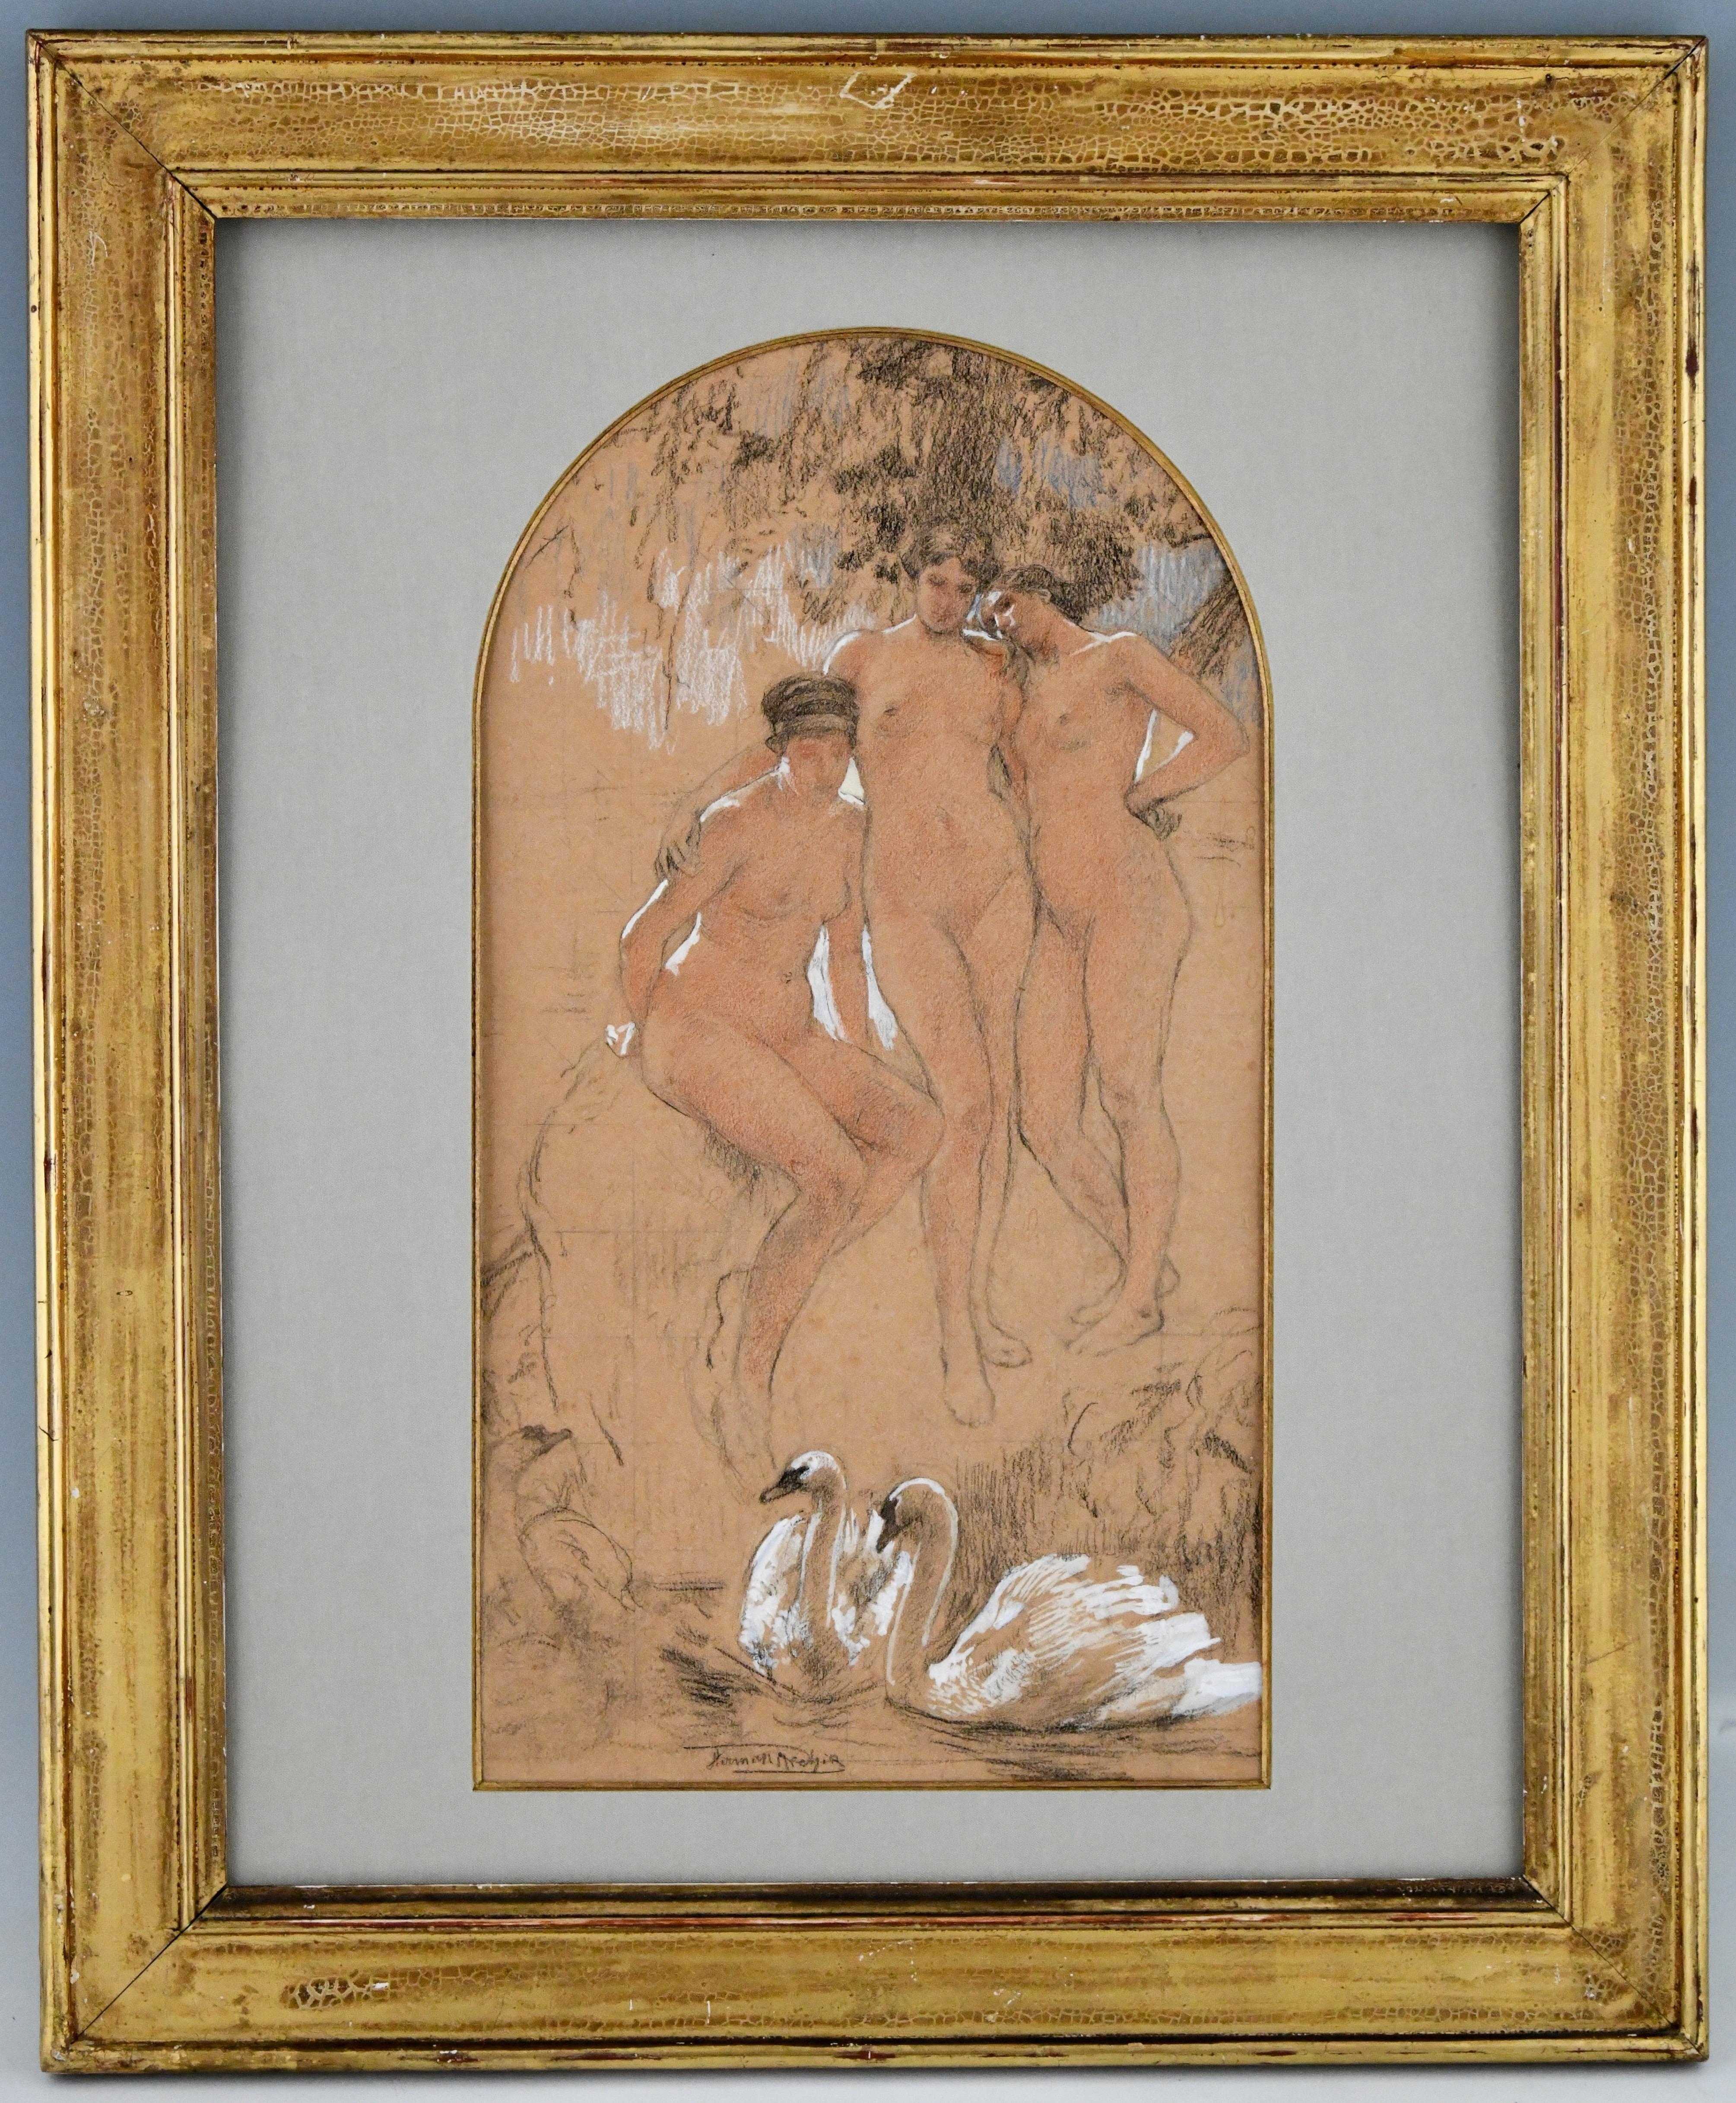 Art Nouveau gouache drawing three graces with swans signed by the Belgian artist Herman Richir. 1866-1942. The work has an antique gilt wood frame. Dimensions framed: 
L. 52 cm. x H. 64 cm. x W. 2.5 cm. 
L. 20.5 inch. X H. 25.2 inch x W. 1 inch.